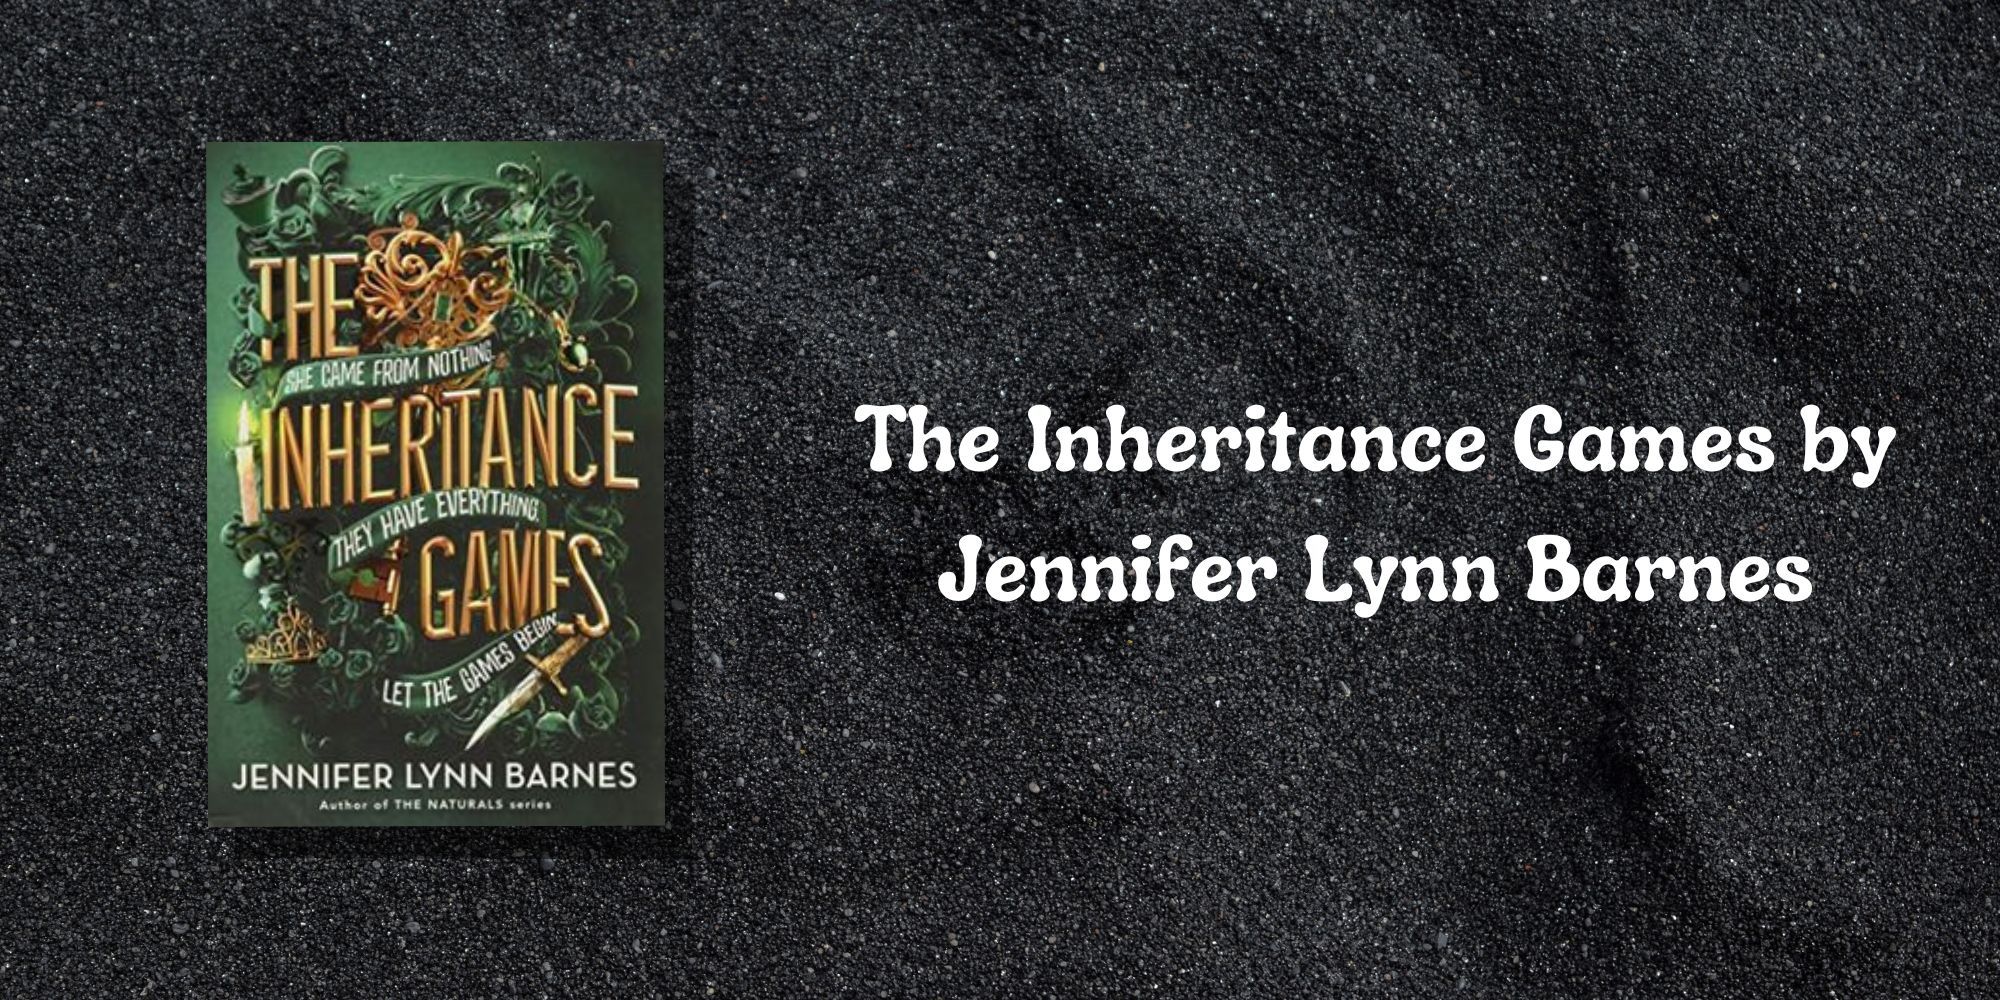 The Cover Of The Inheritance Games by Jennifer Lynn Barnes